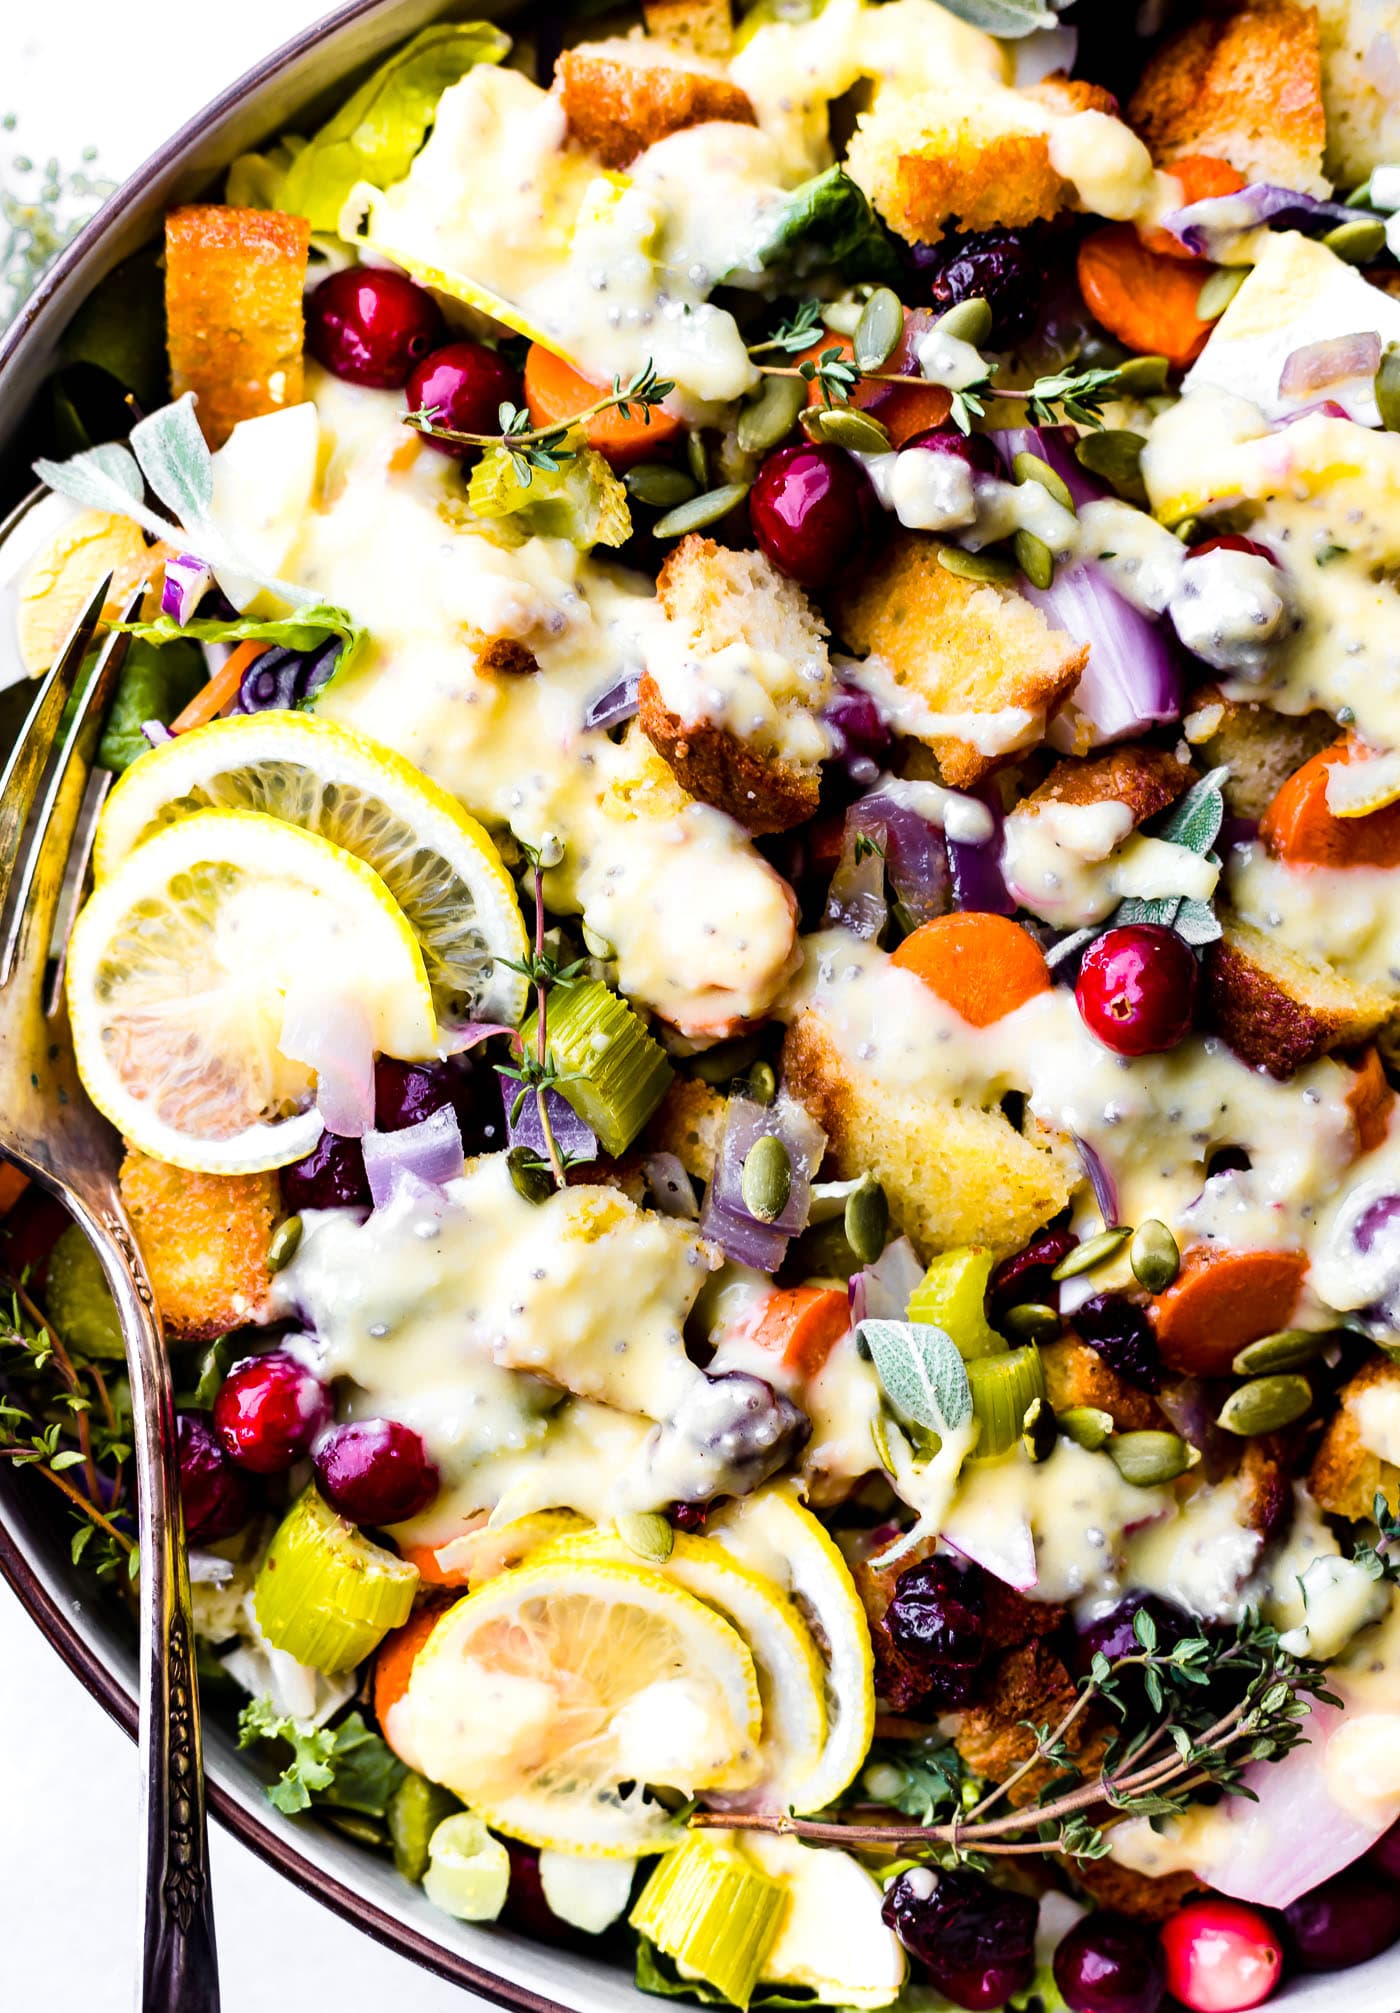 Gluten Free Stuffing Salad with Warm Onion Dressing! A lightened up Thanksgiving side dish that quick to make and flavorful. A Dairy free, easy, healthy gluten free stuffing recipe!